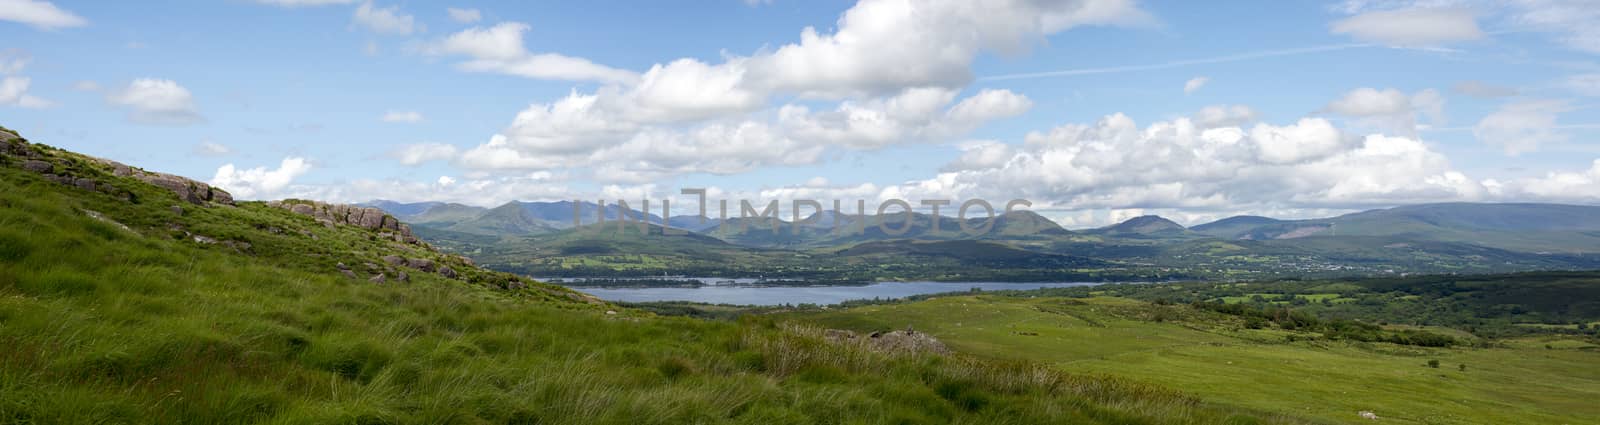 panorama of the view from the kerry way by morrbyte